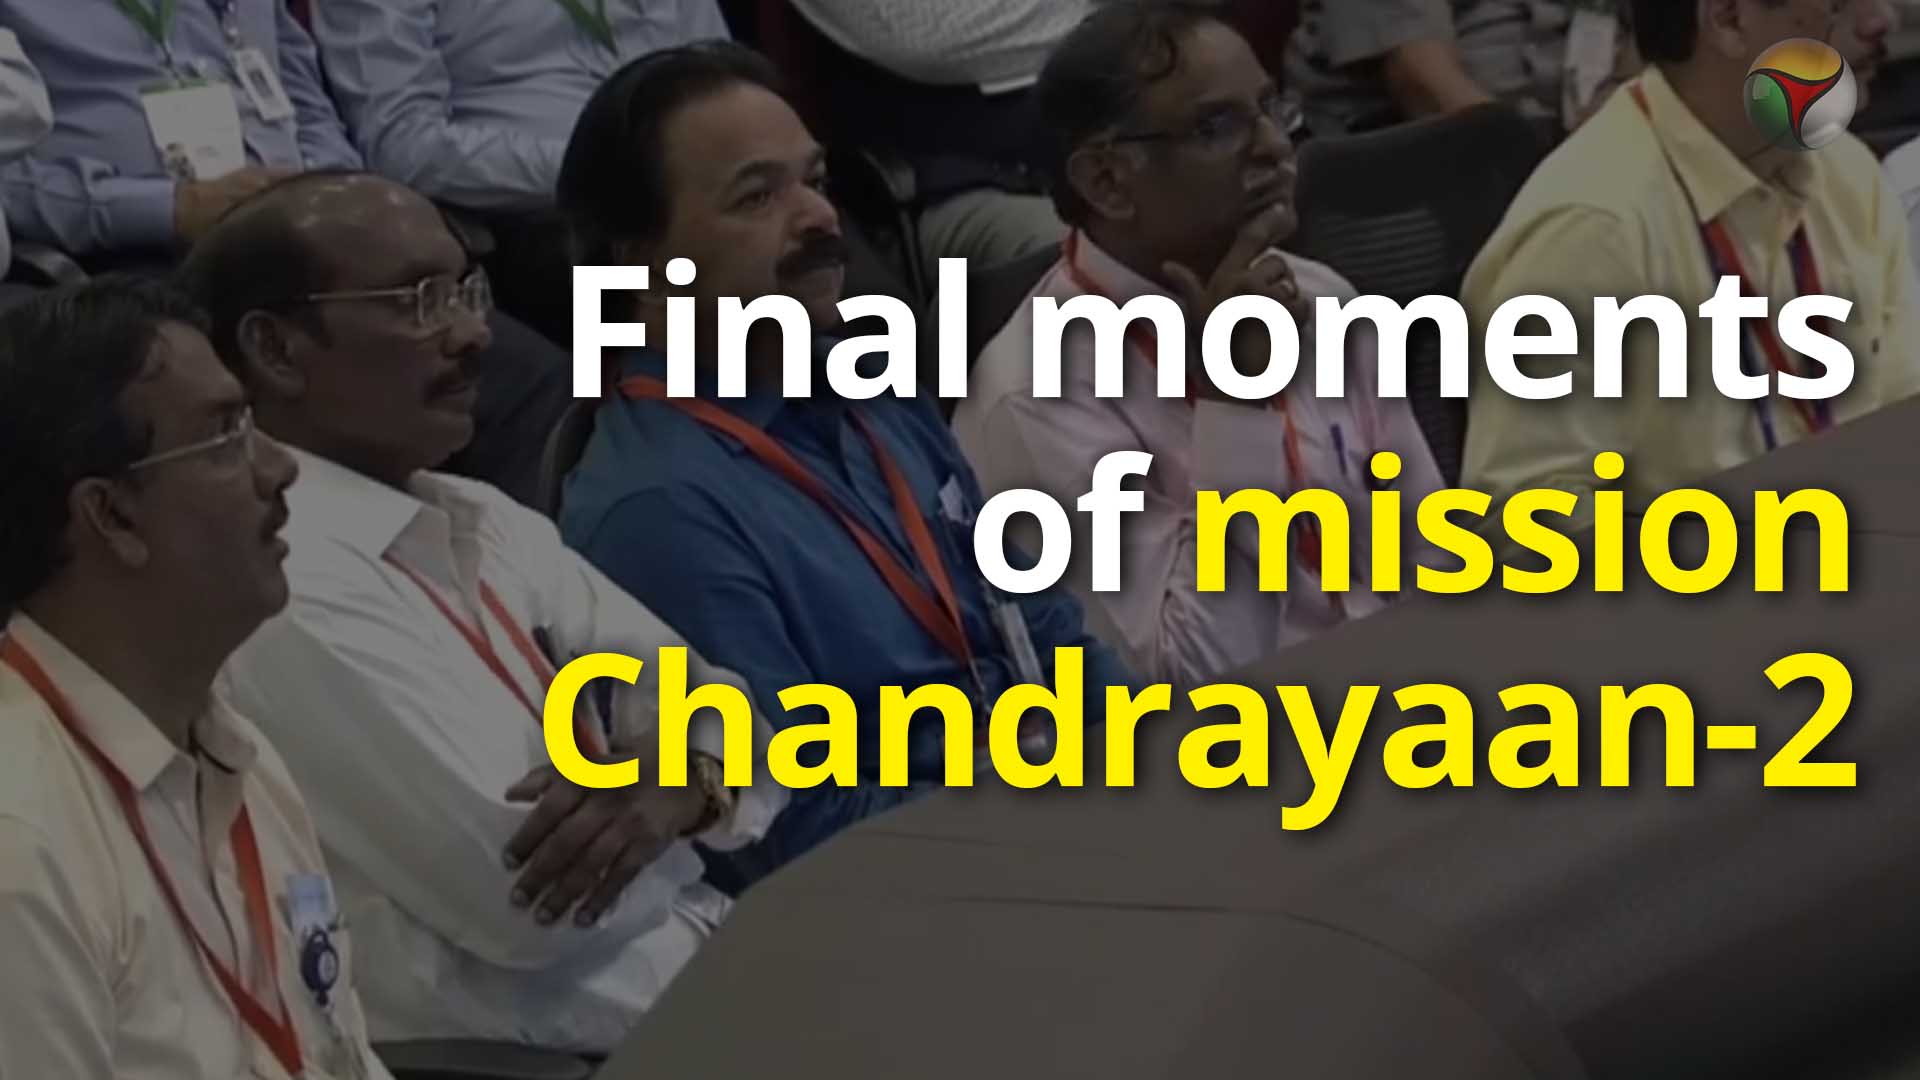 Final moments of mission Chandrayaan-2